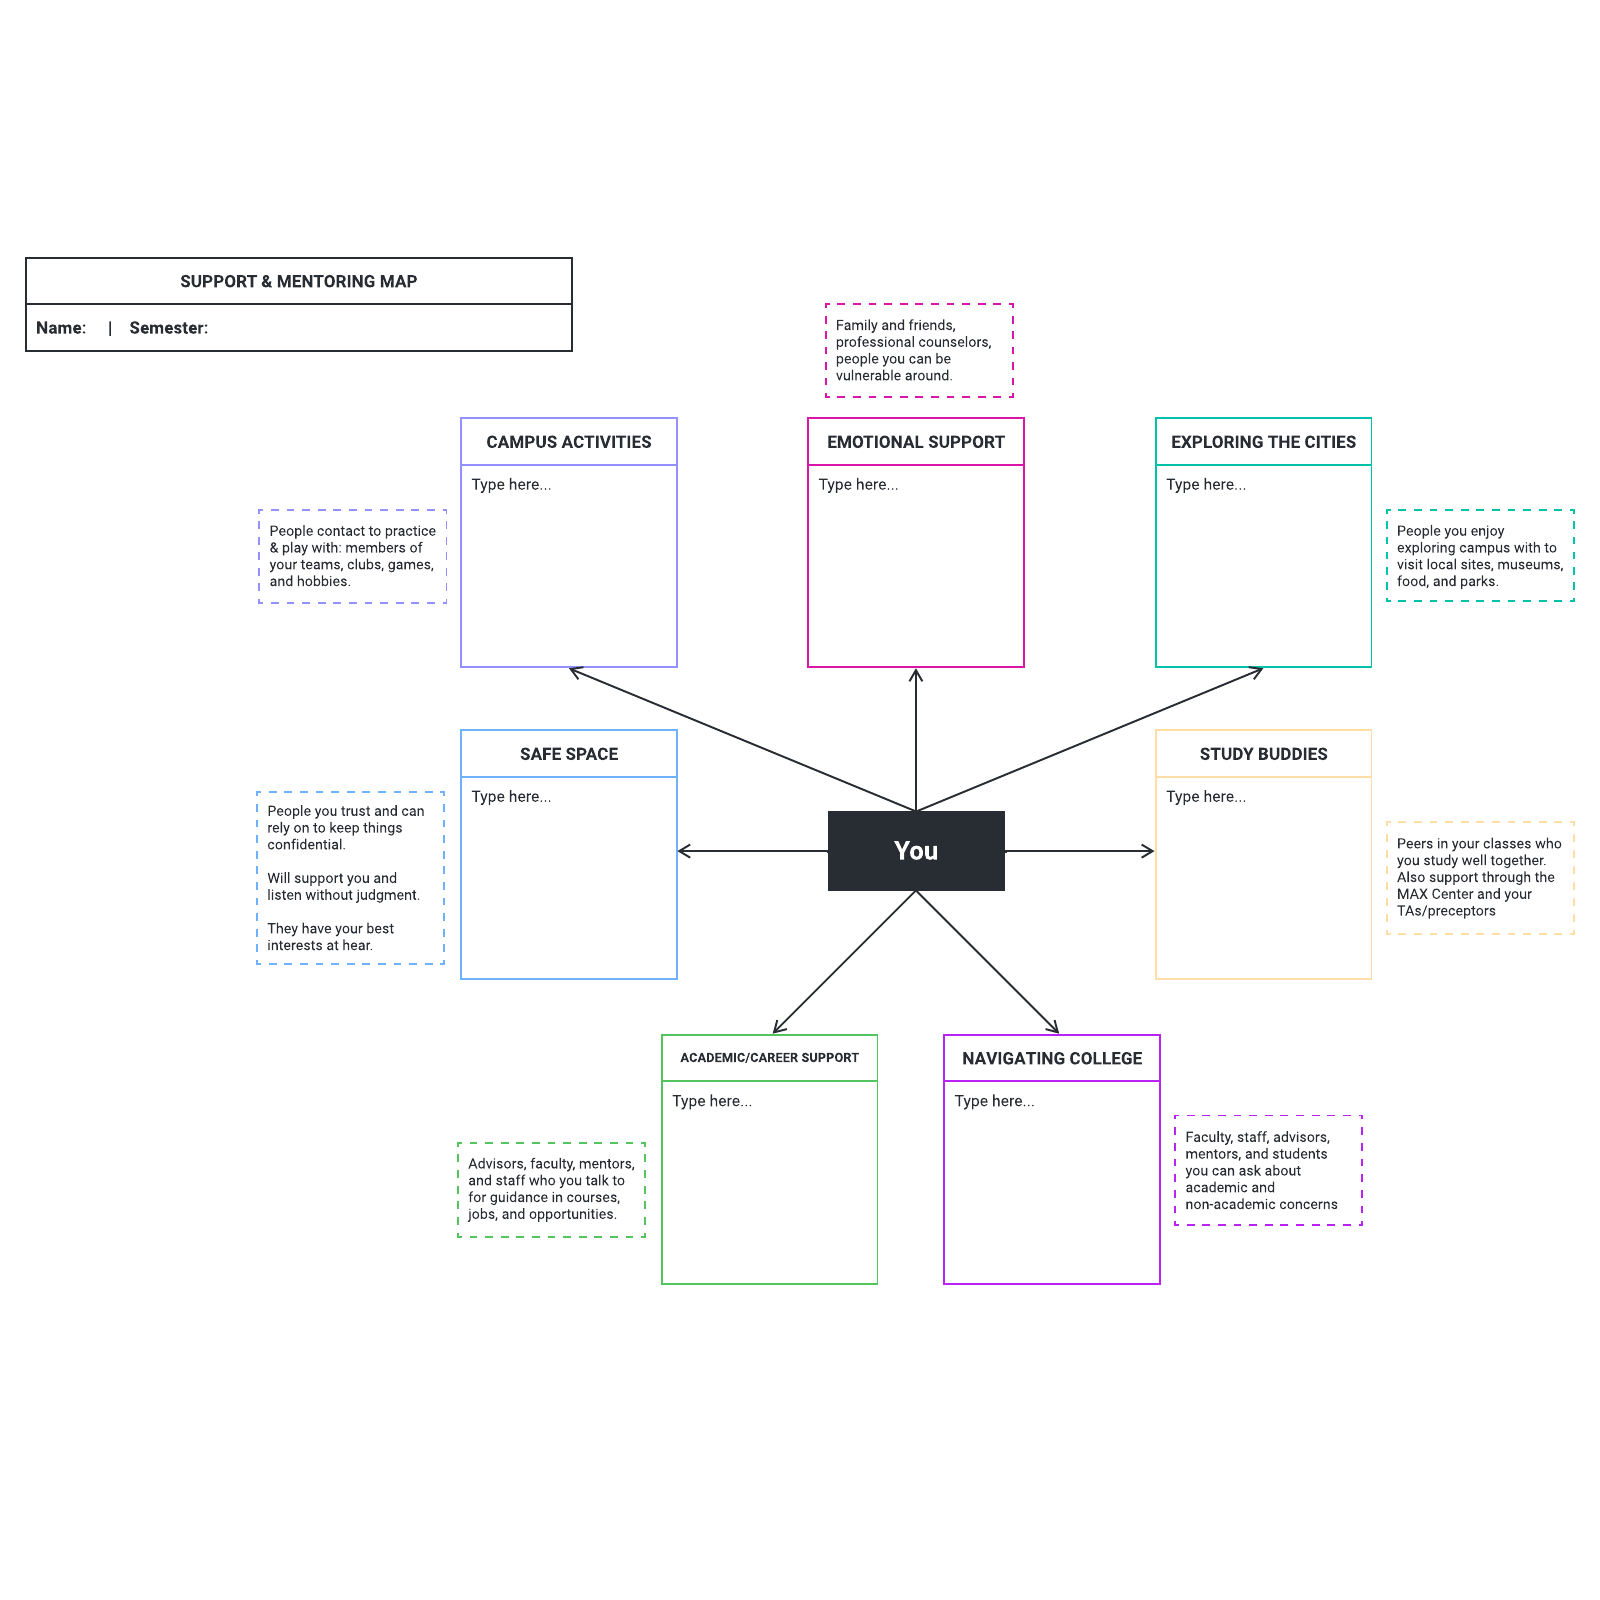 Support and mentoring map example